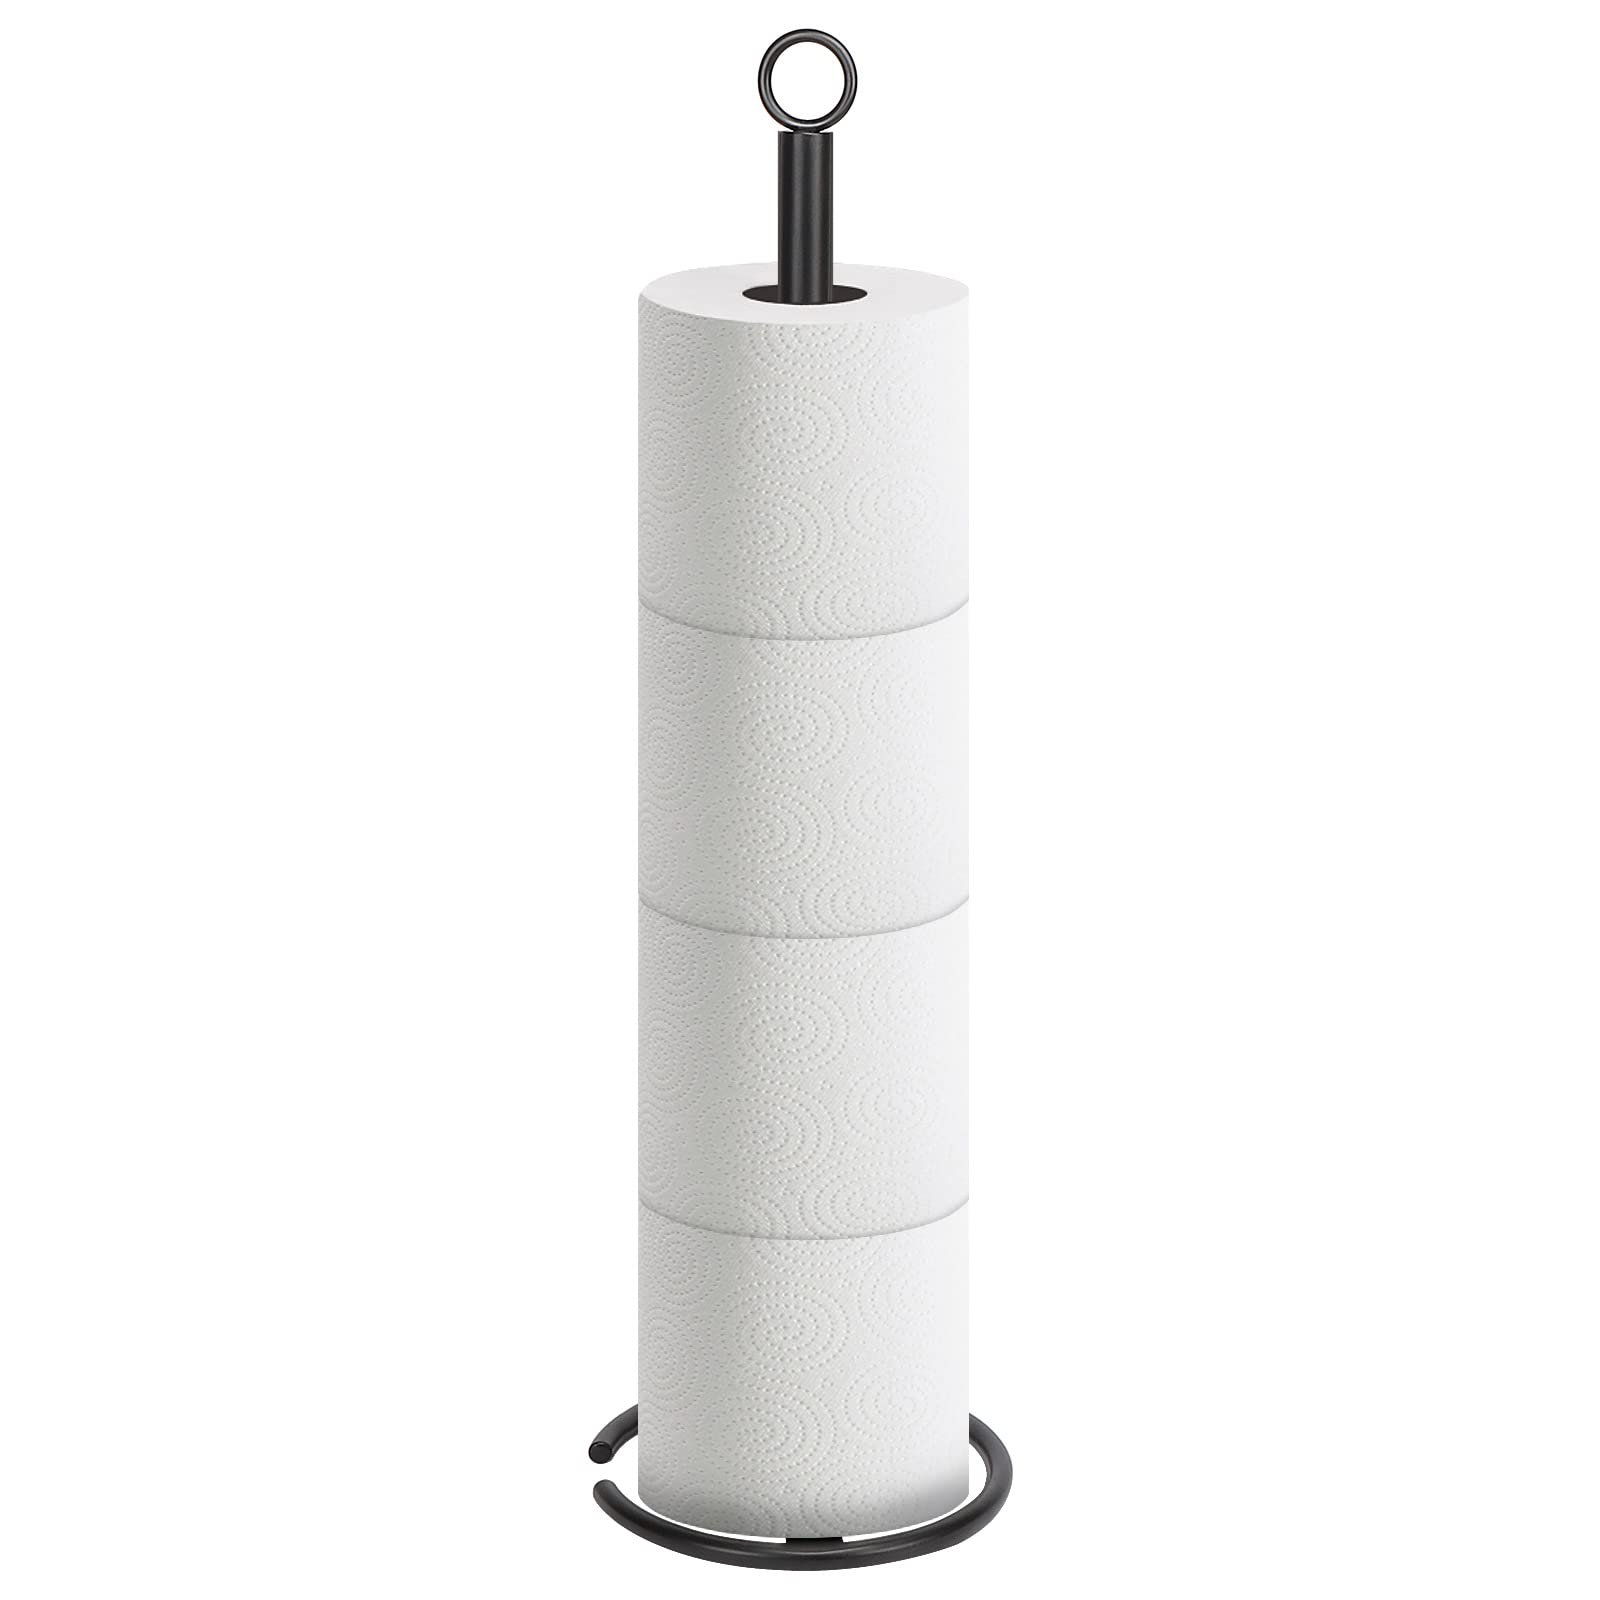 SunnyPoint Toilet Paper Holder with Circle Base